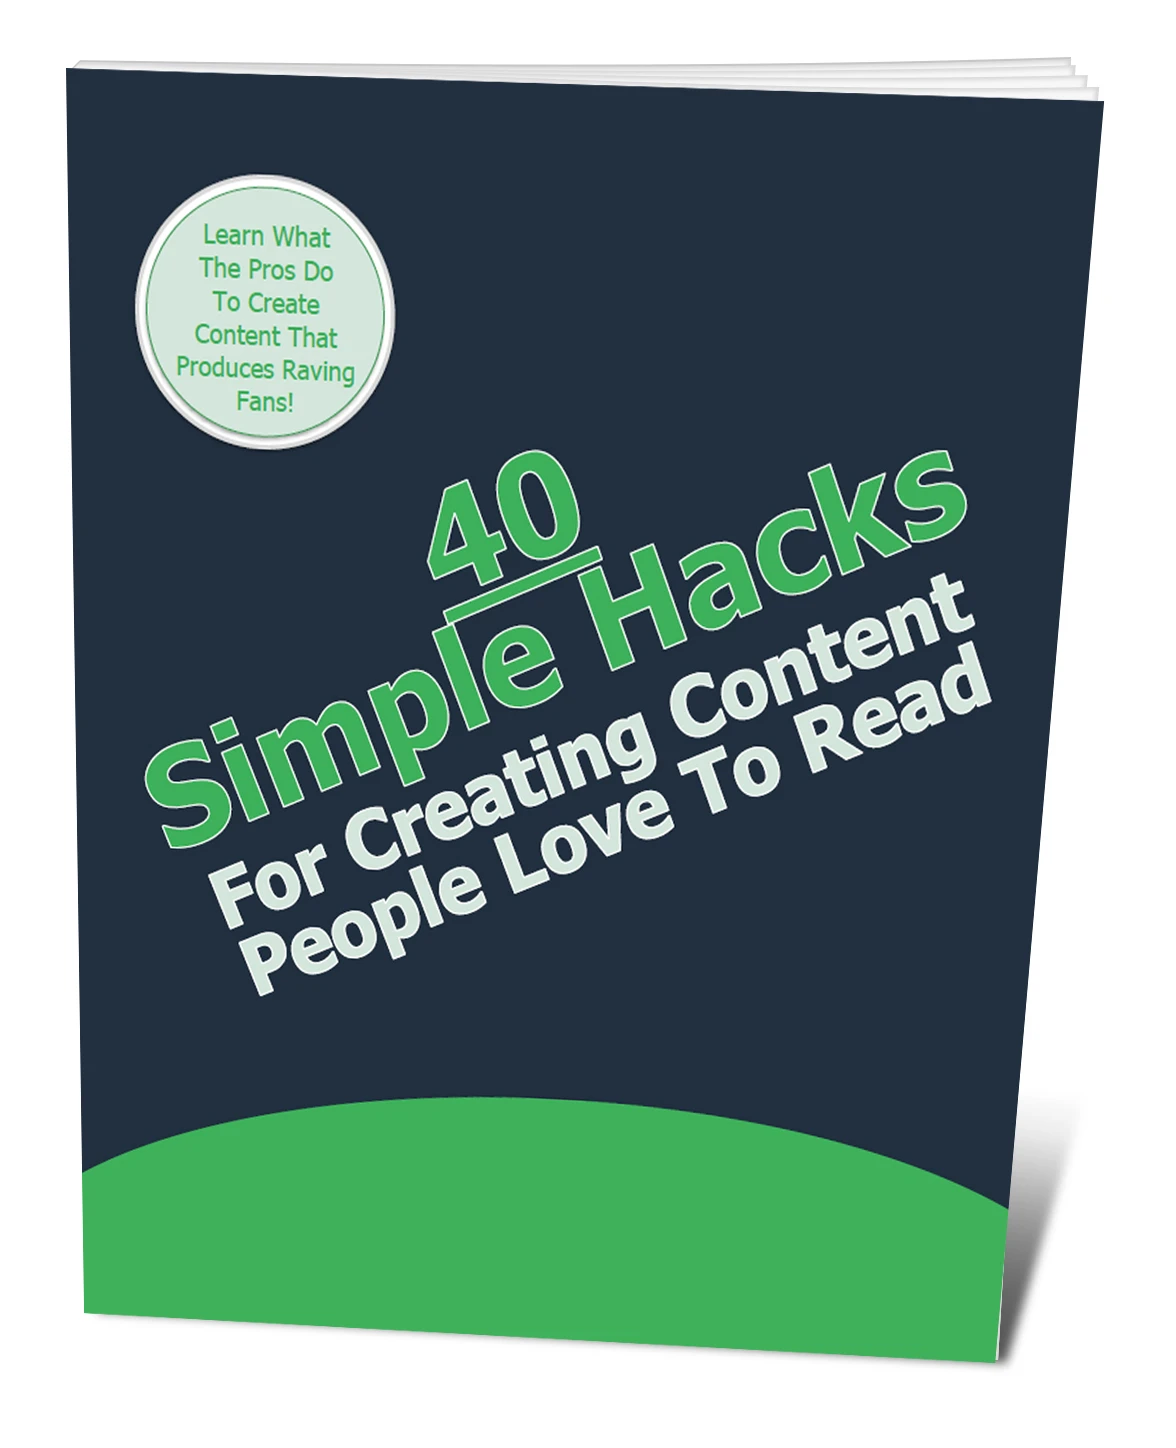 212-40-simple-hacks-for-creating-content-people-love-to-read-17059694677478.jpg